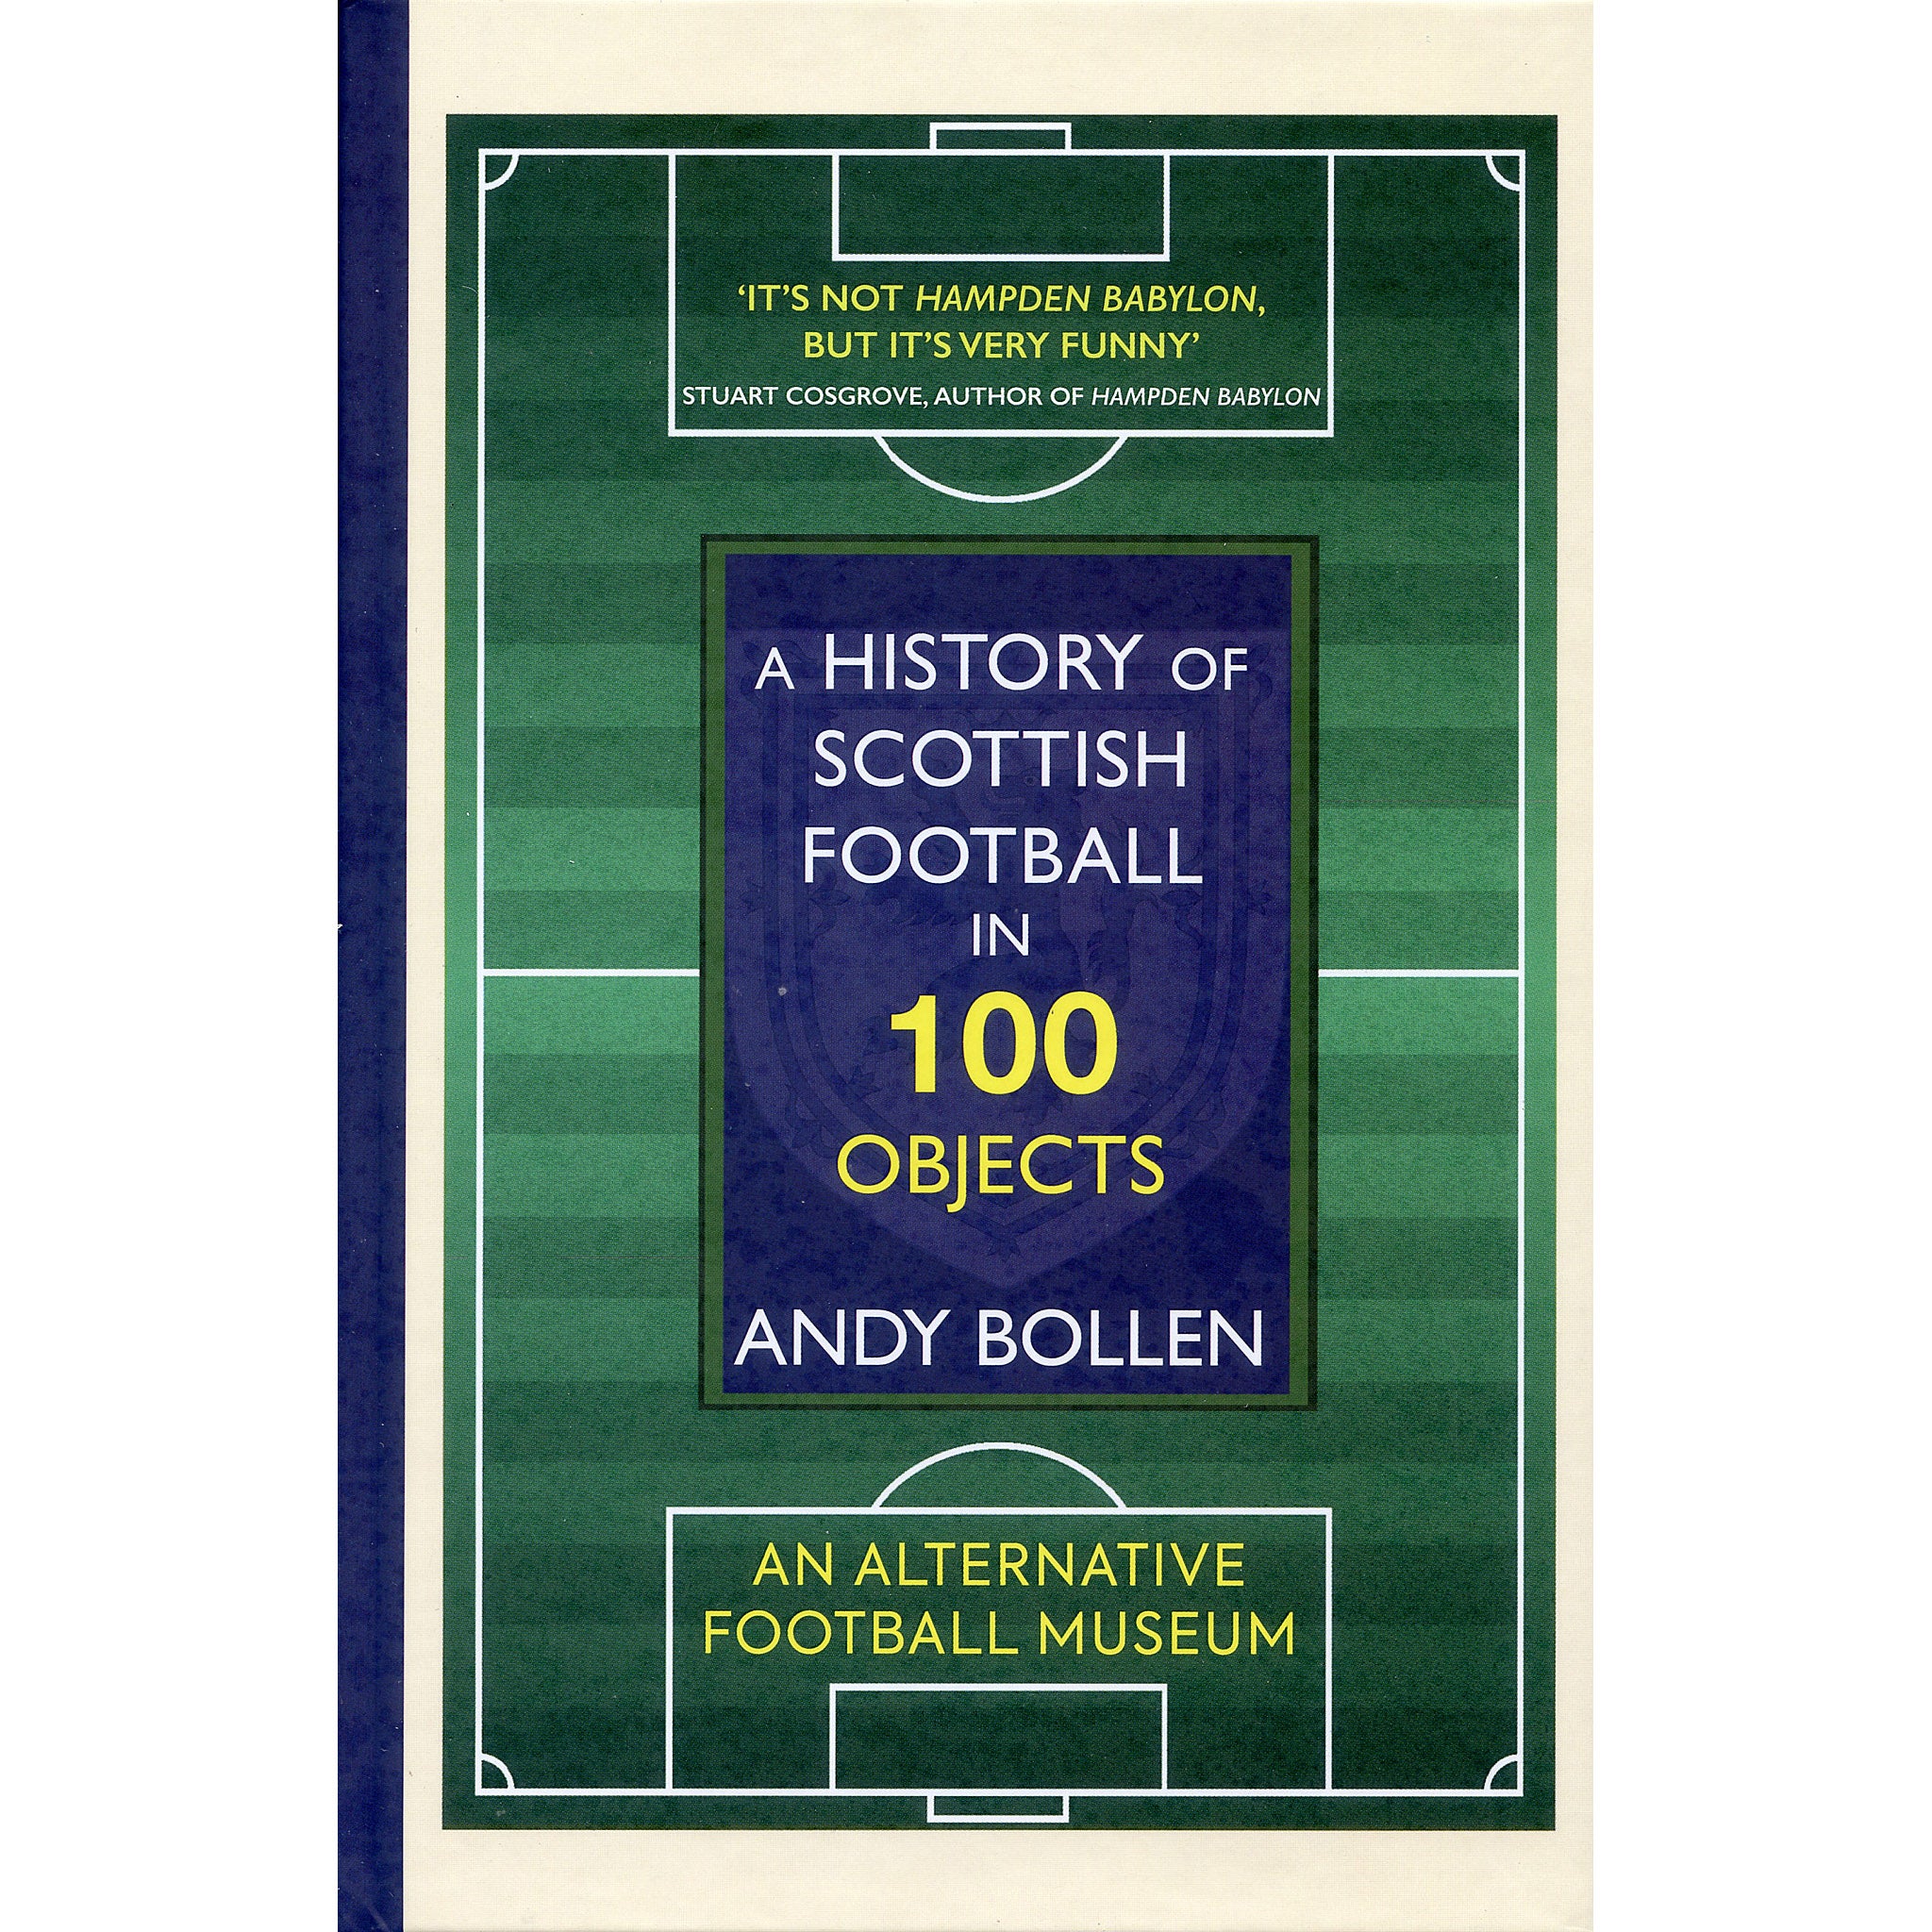 A History of Scottish Football in 100 Objects – An Alternative Football Museum